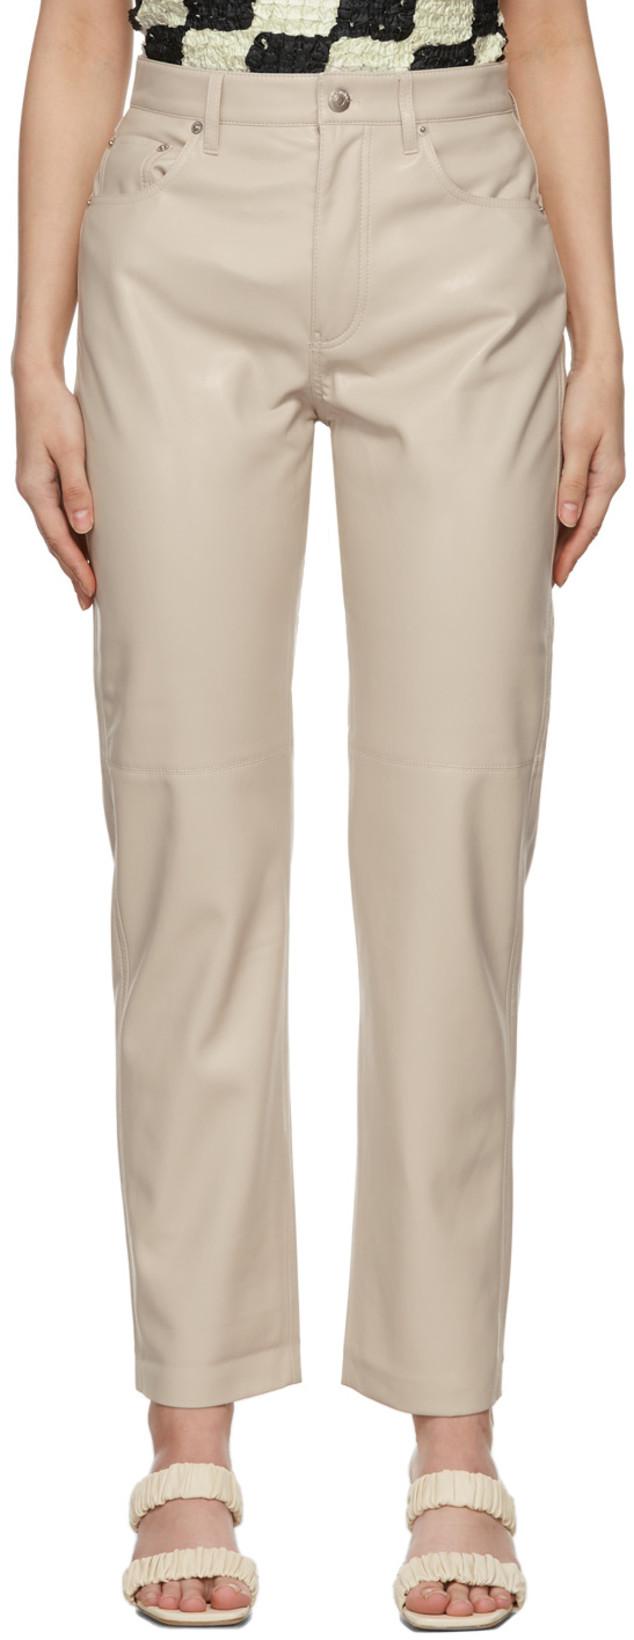 Natural Slacks and Chinos Womens Trousers Slacks and Chinos Nanushka Trousers Nanushka Beata Cotton Blend Pants in Ivory 